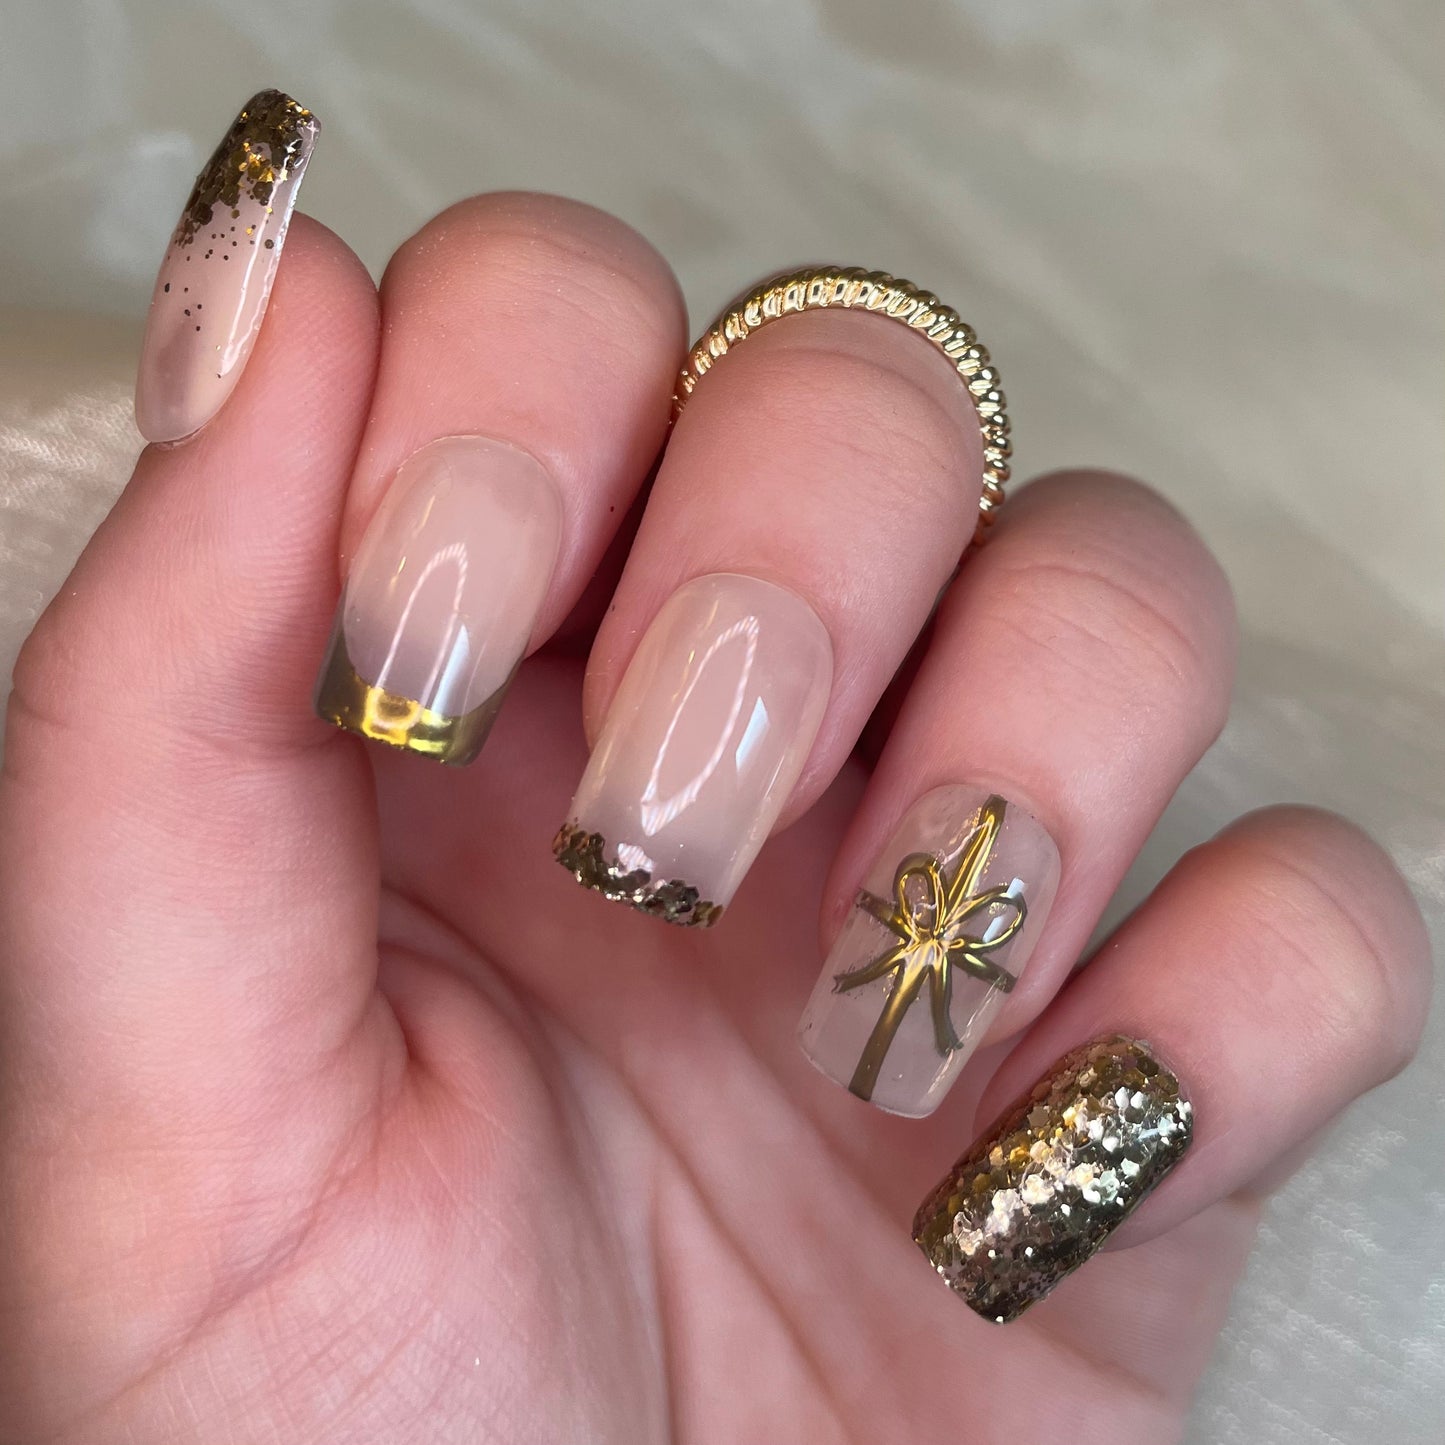 Shee Nude Square Nails with Gold Present Design